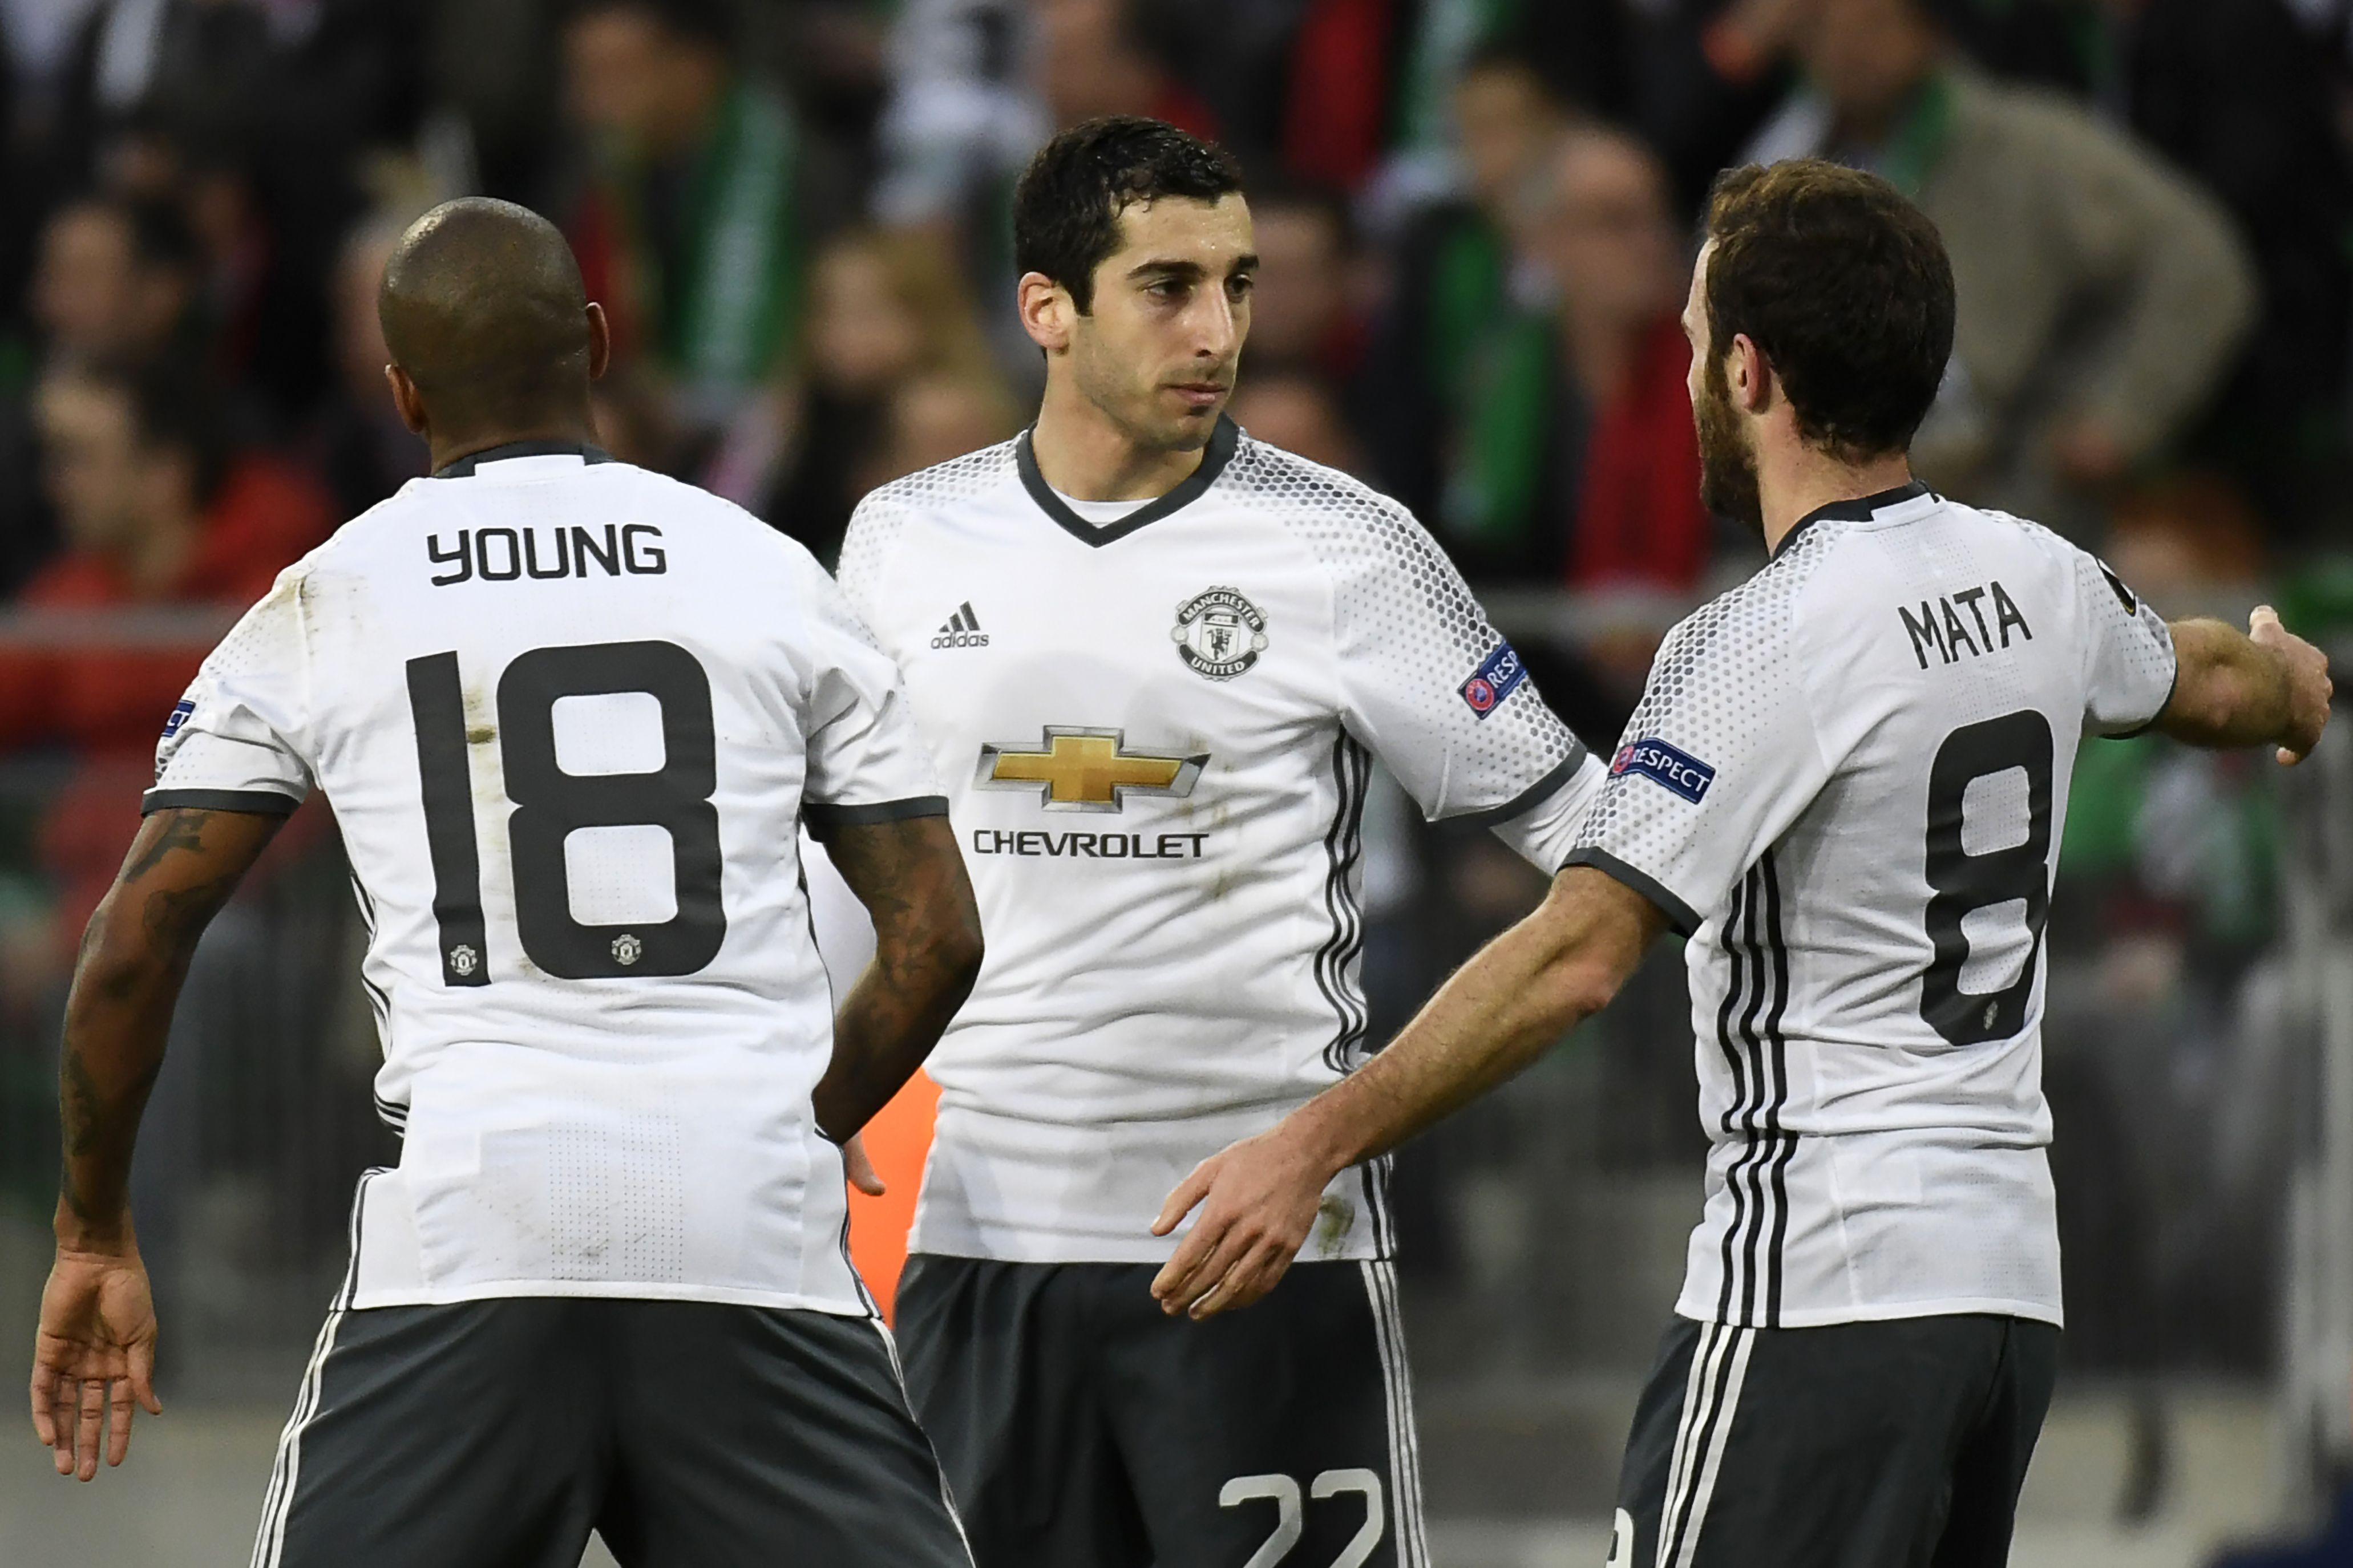 Manchester's United's Armenian forward Henrikh Mkhitaryan (C) celebrates with teammates Spanish midfielder Juan Mata (R) and British midfielder Ashley Young (L) after scoring a goal during the UEFA Europa League football match between AS Saint-Etienne and Manchester United on February 22, 2017, at the Geoffroy Guichard stadium in Saint-Etienne, central France. / AFP / PHILIPPE DESMAZES        (Photo credit should read PHILIPPE DESMAZES/AFP/Getty Images)